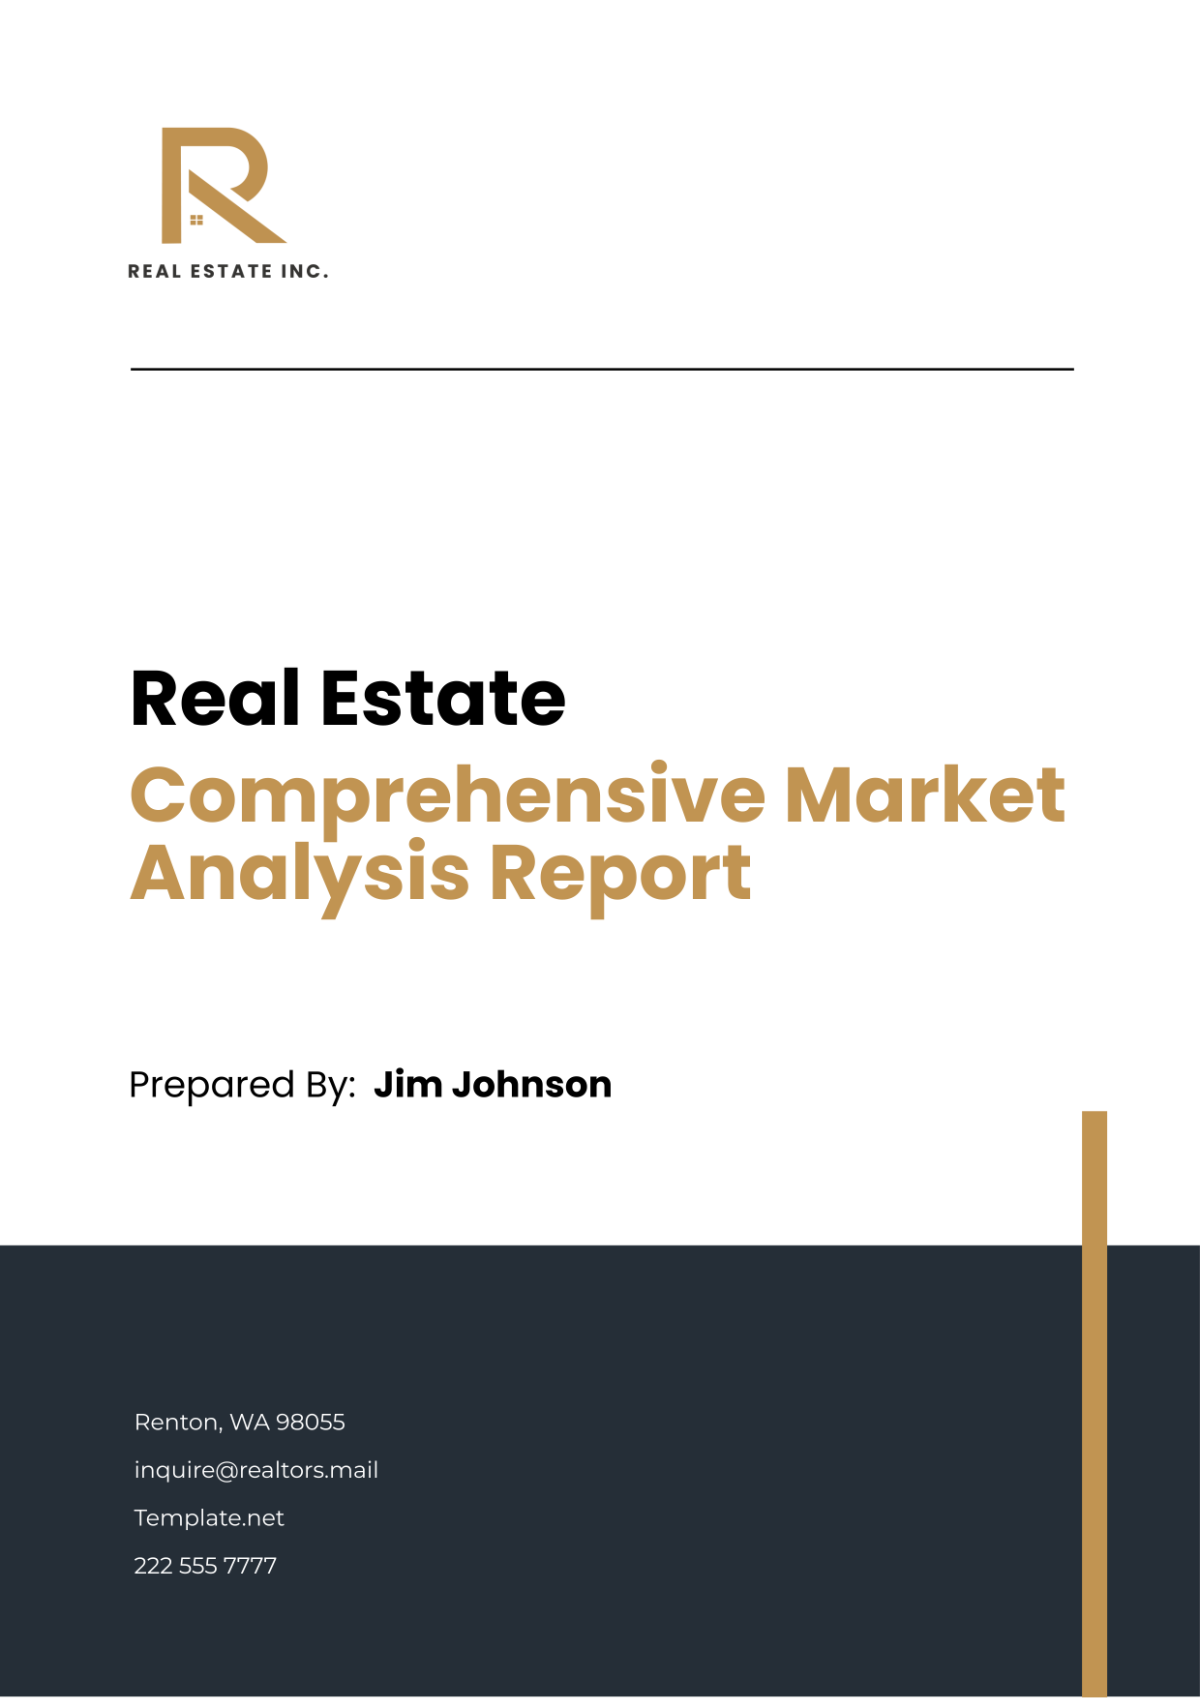 Free Real Estate Comprehensive Market Analysis Report Template